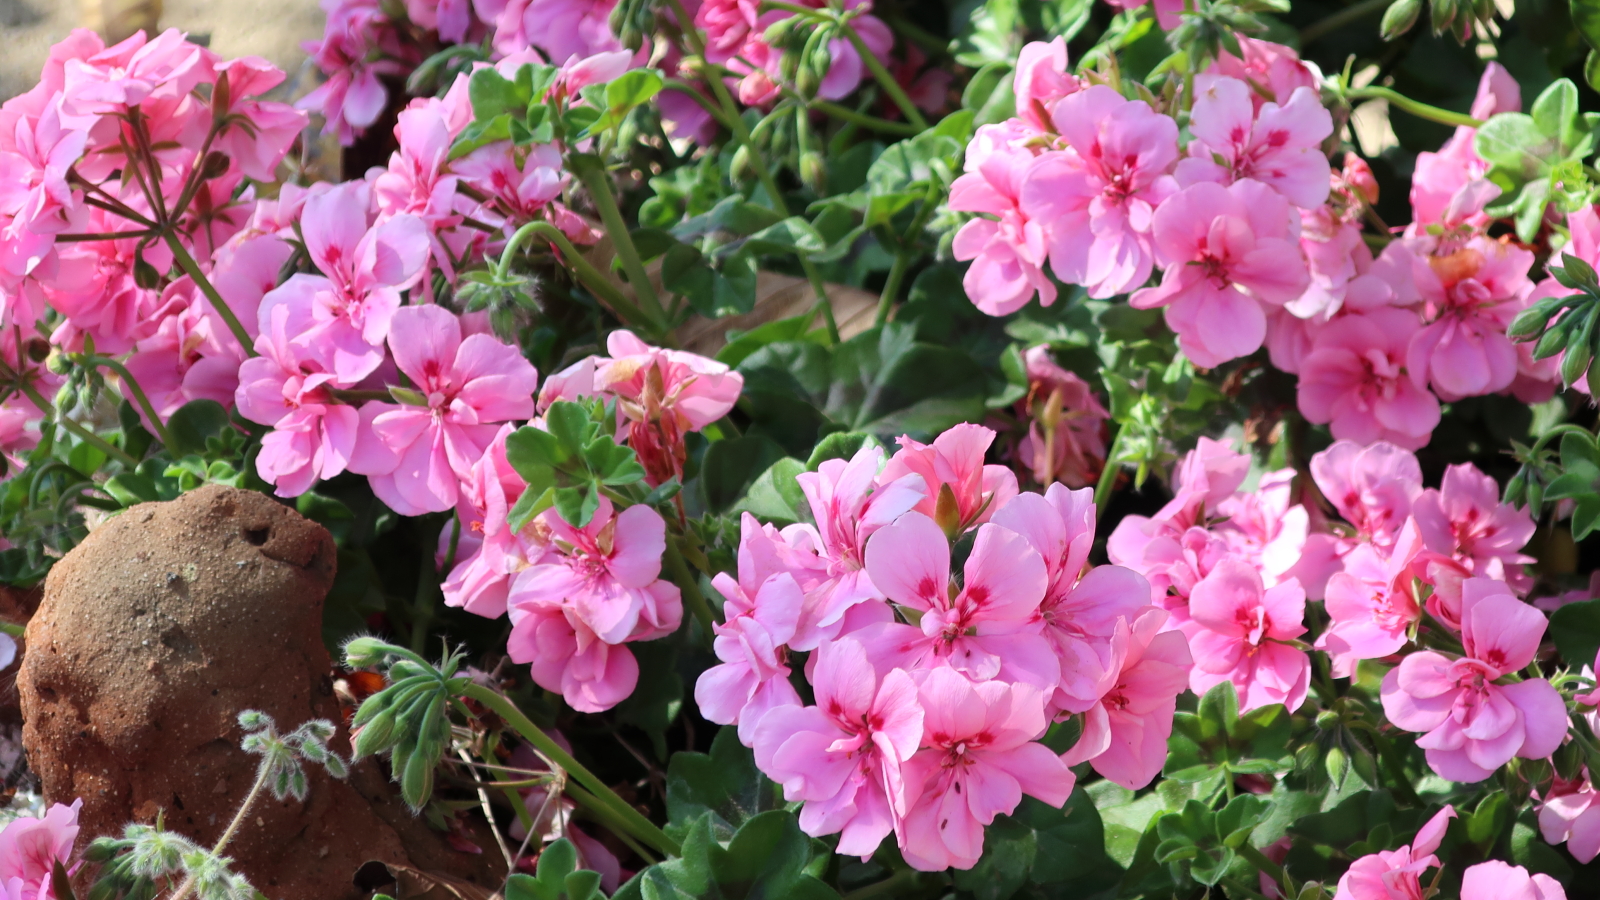 A collection of Ivy leaf geraniums with abundant pink flowers